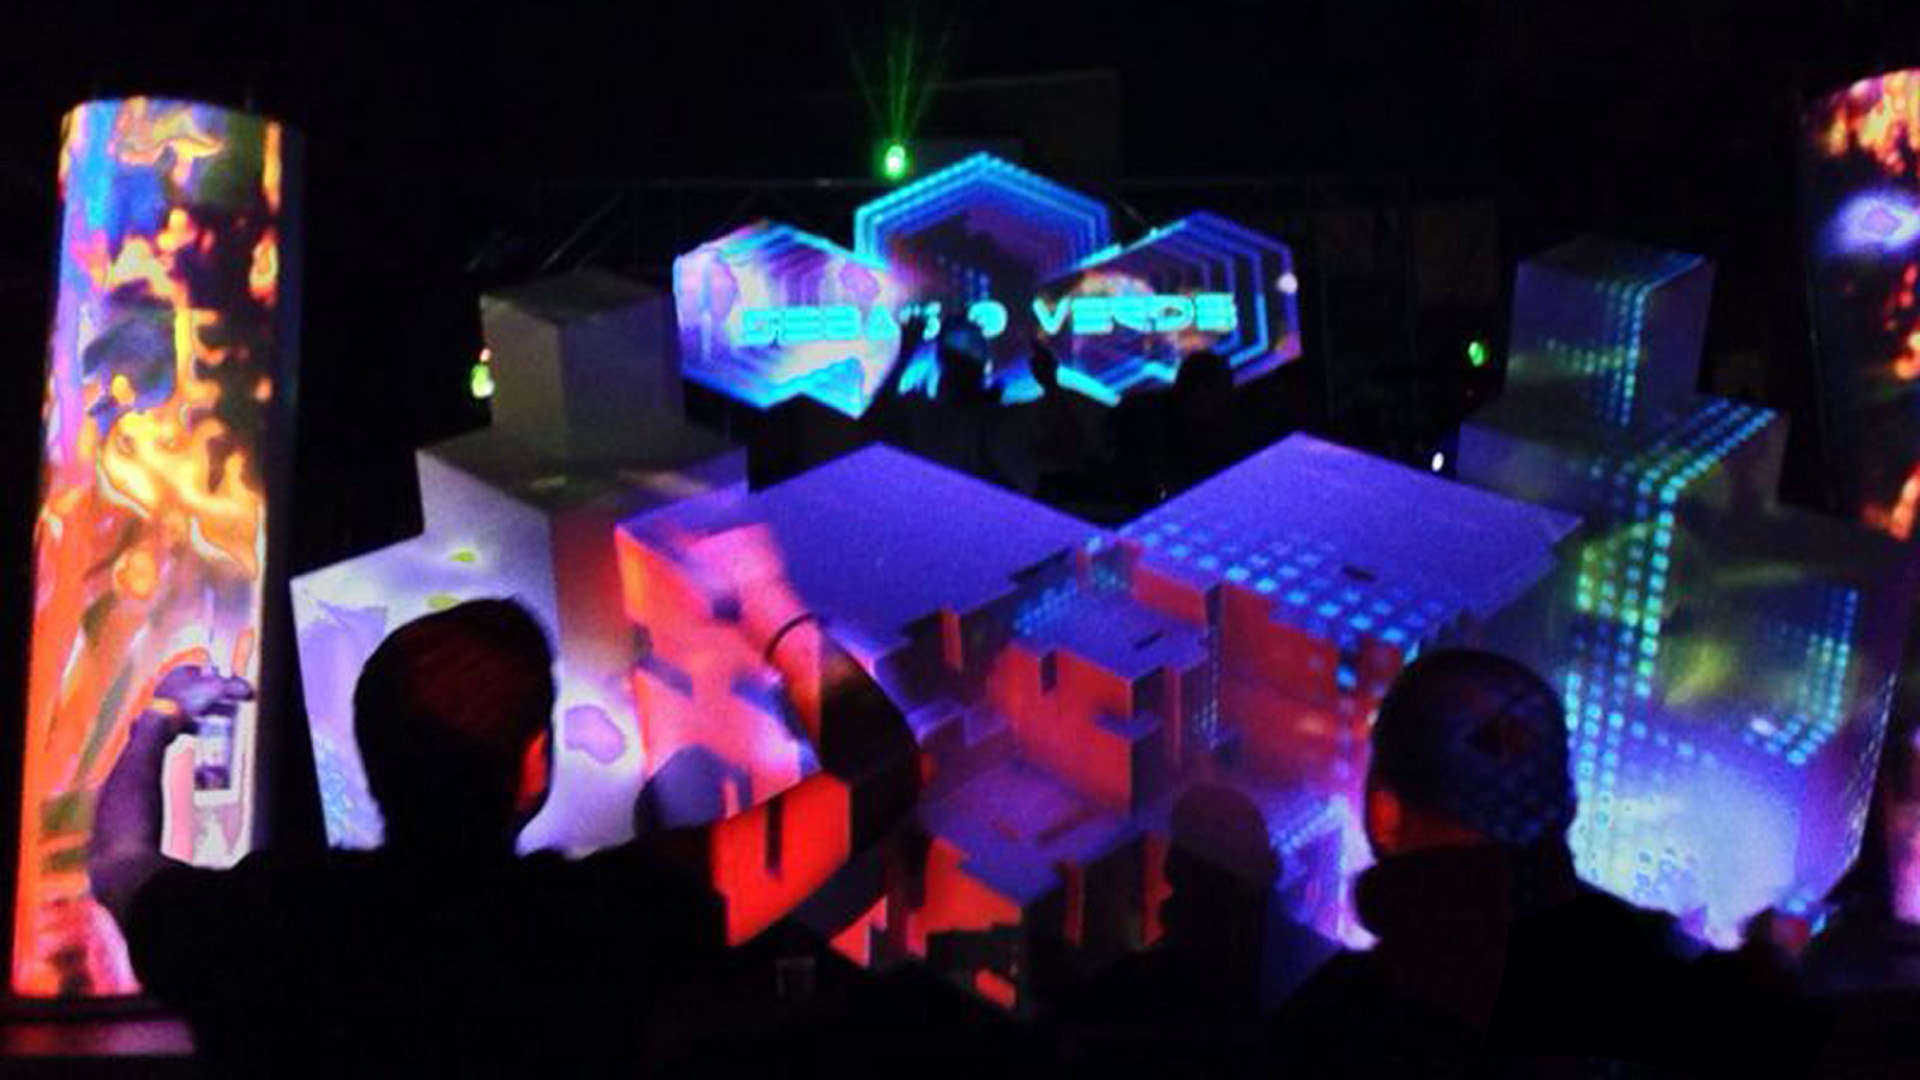 Explore the world of electronic music with a show that combines stage design, video mapping, and VJing in an audio-reactive performance.